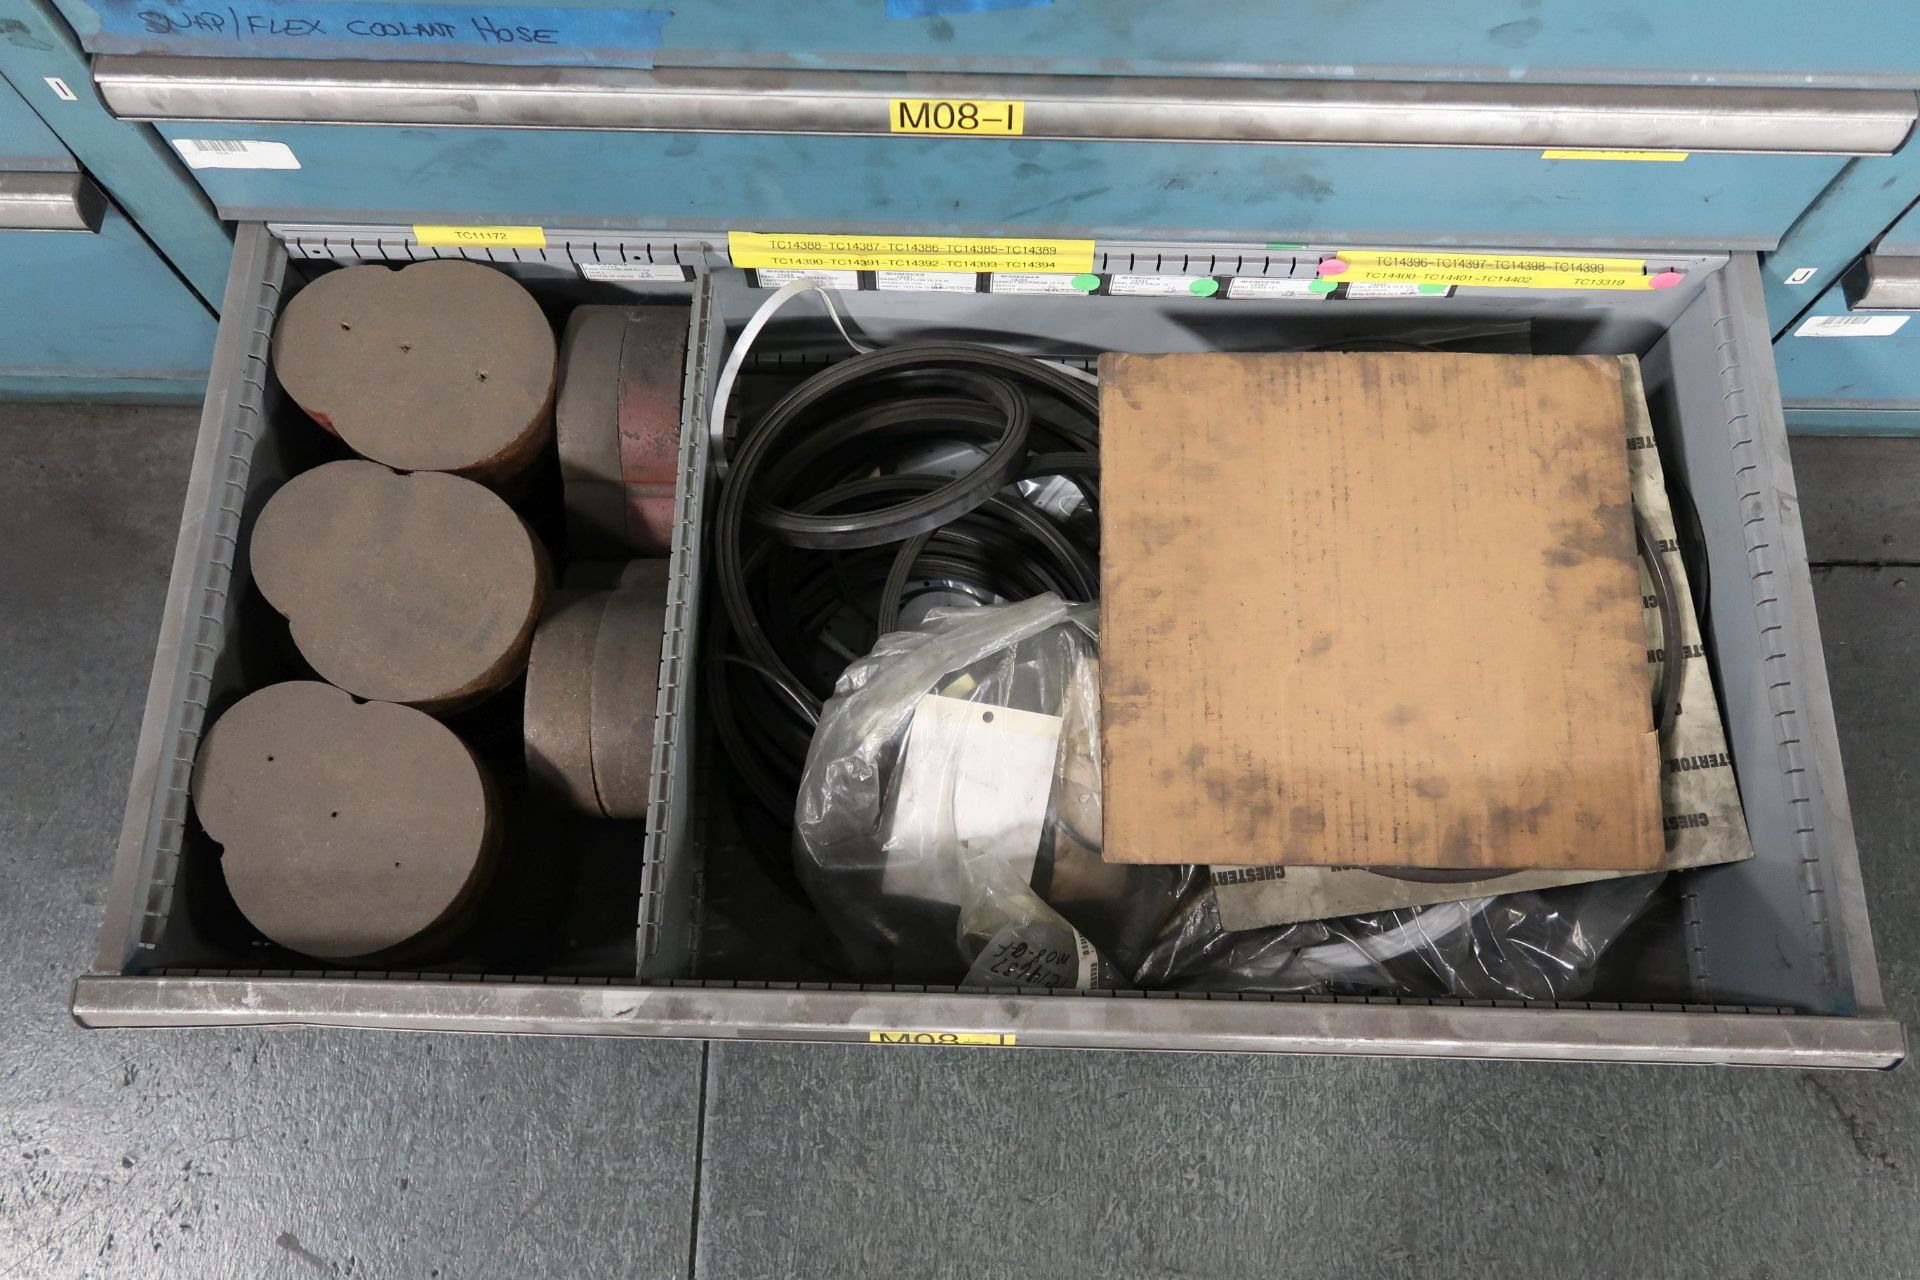 TOOLING CABINETS WITH CONTENTS - MOSTLY MACHINE PARTS **LOADING PRICE DUE TO ERRA - $2,000.00** - Image 51 of 59